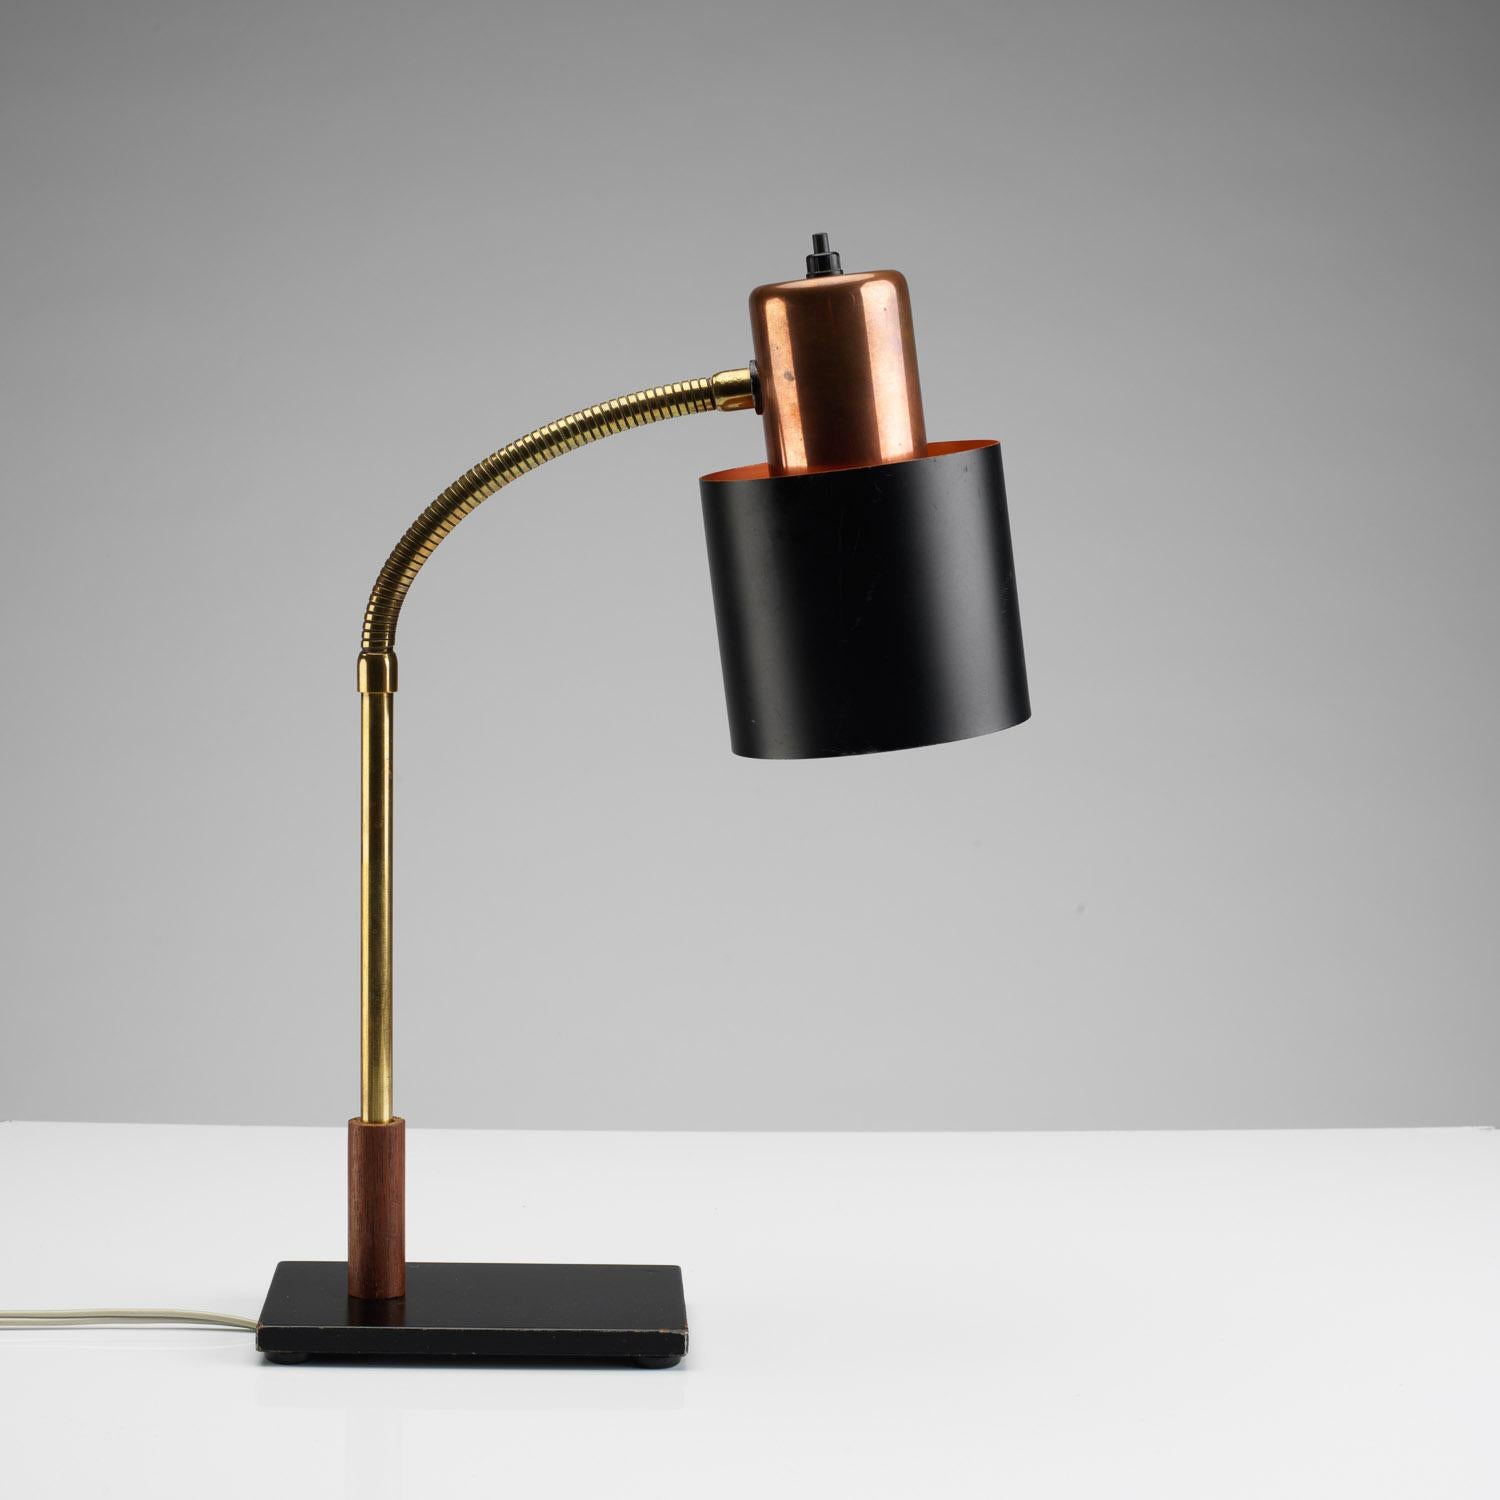 Designed by Jo Hammerborg in the late 1950s for Fog & Mørup. Flexible brass neck with teak base detail. Copper and black lacquer shade and black footplate. An iconic midcentury Danish piece.